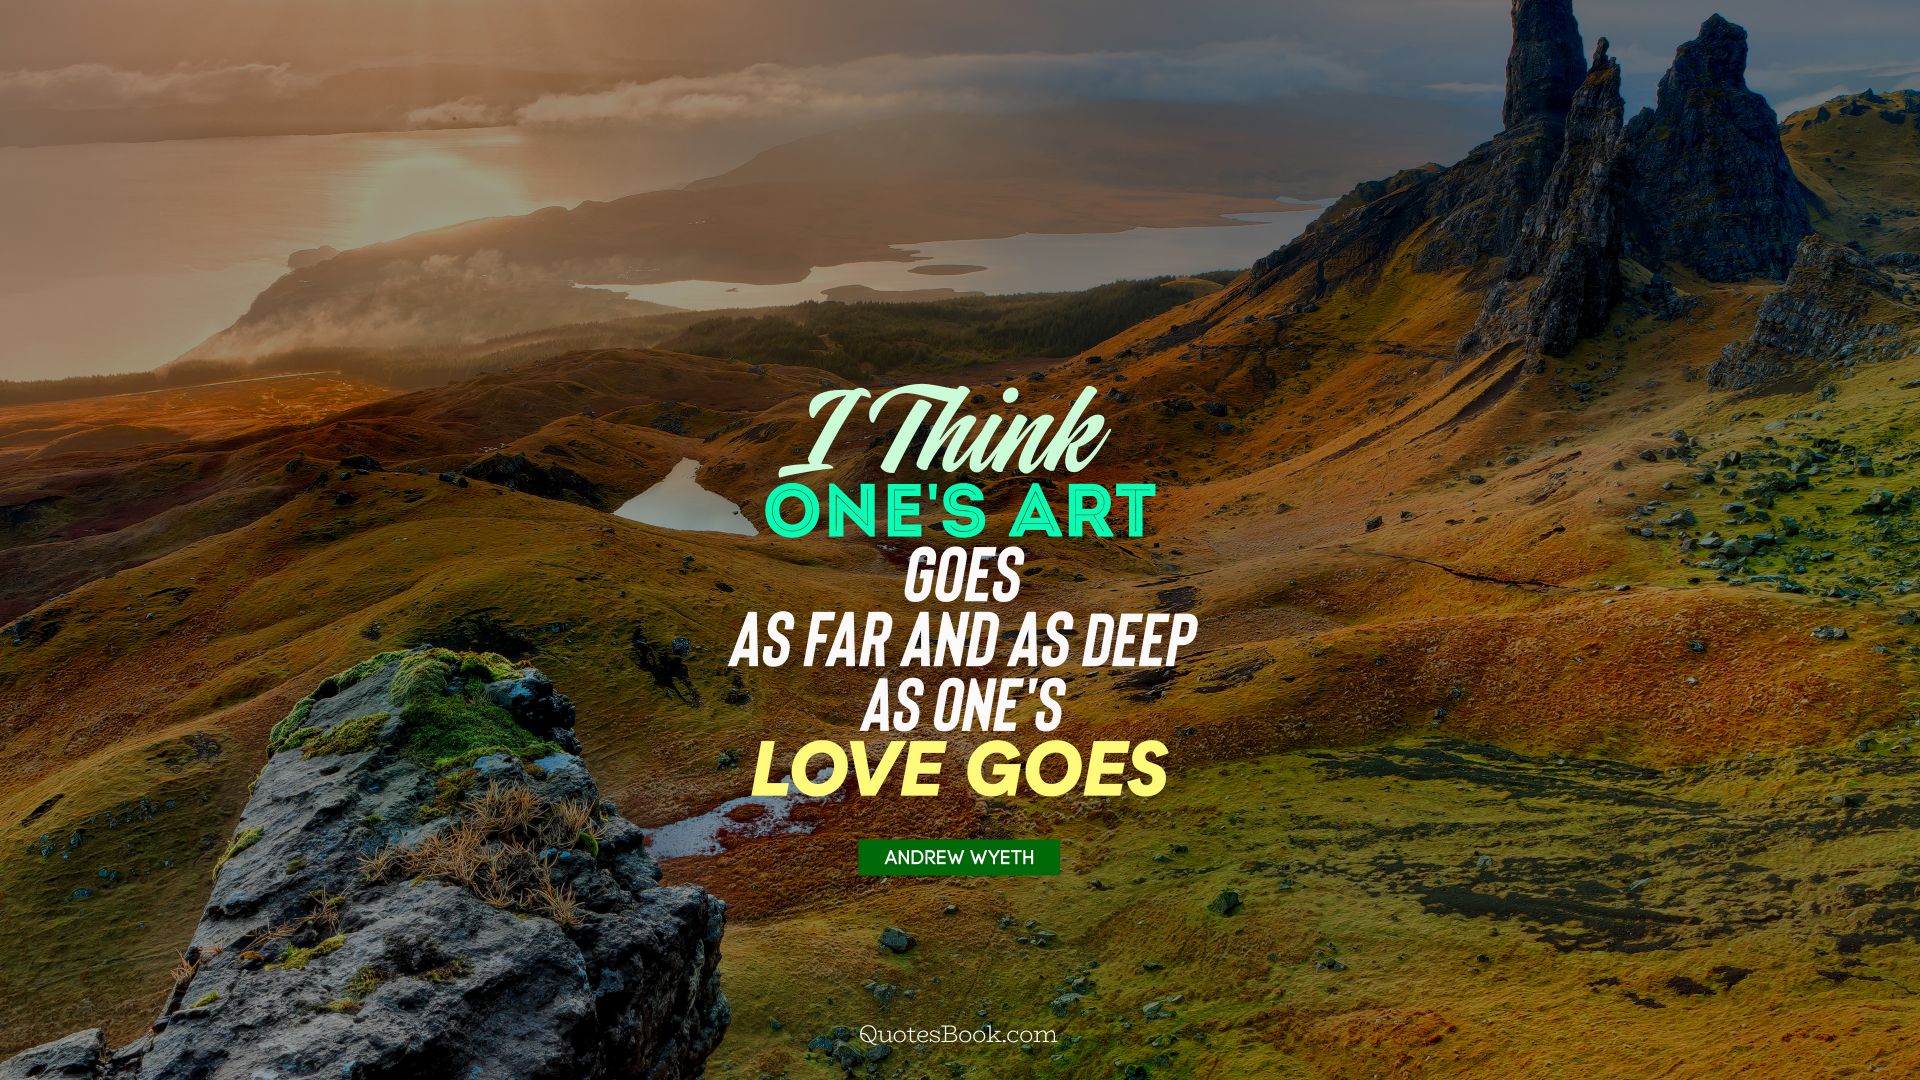 I think one's art goes as far and as deep as one's love goes . - Quote by Andrew Wyeth